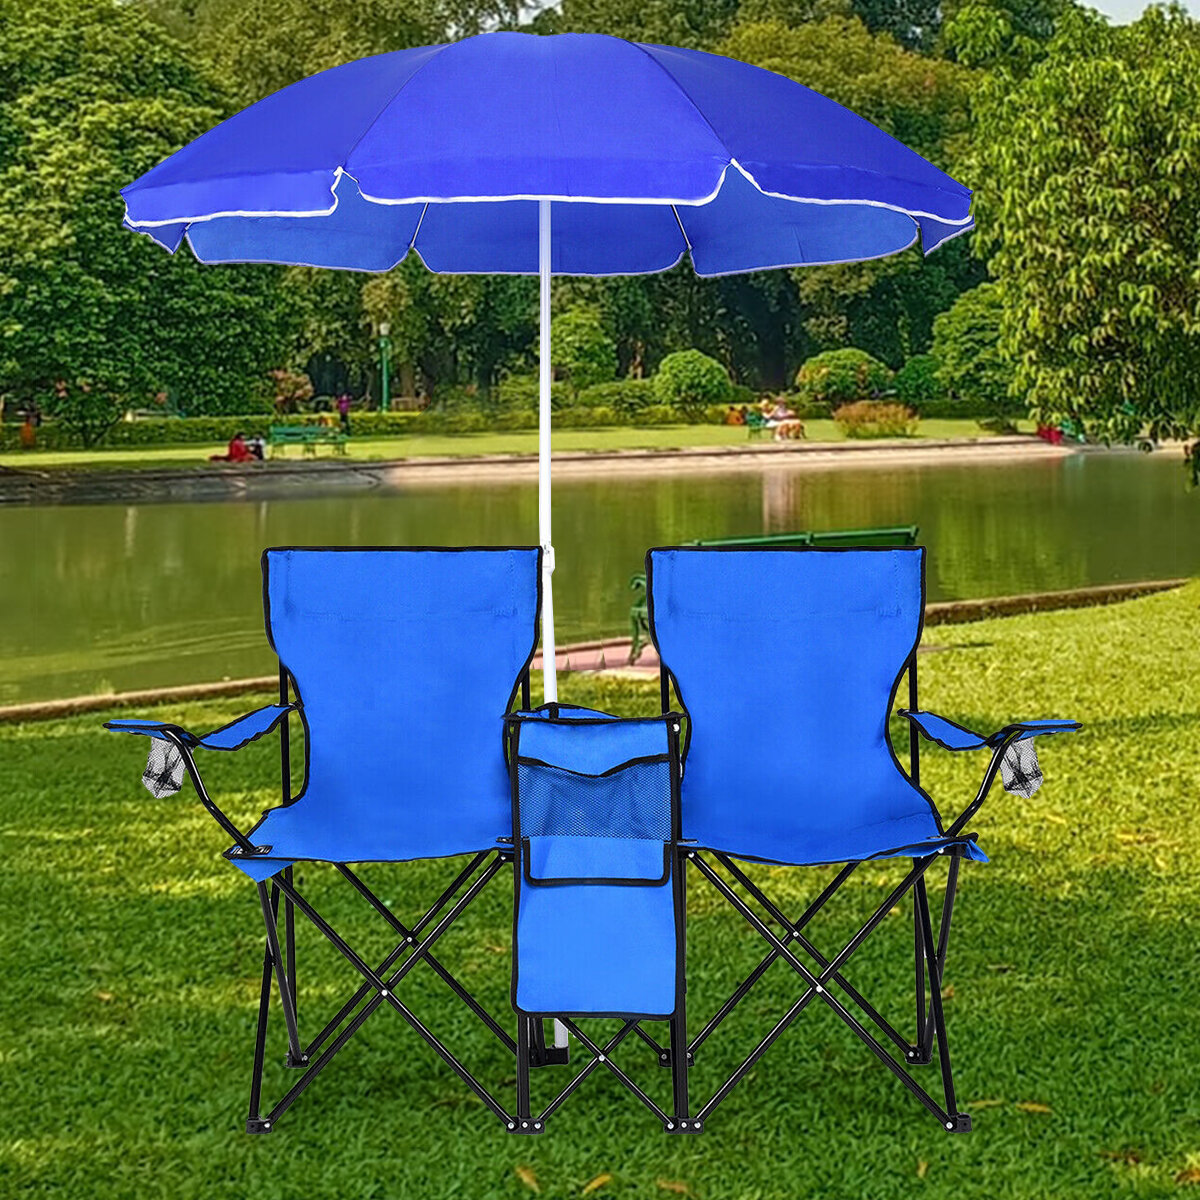 Fishing Sun Protection Chair Beach for Outdoor Foldable Seat with Cup Holder and Carry Bag Garden Folding Camping Chair with Shade Canopy 